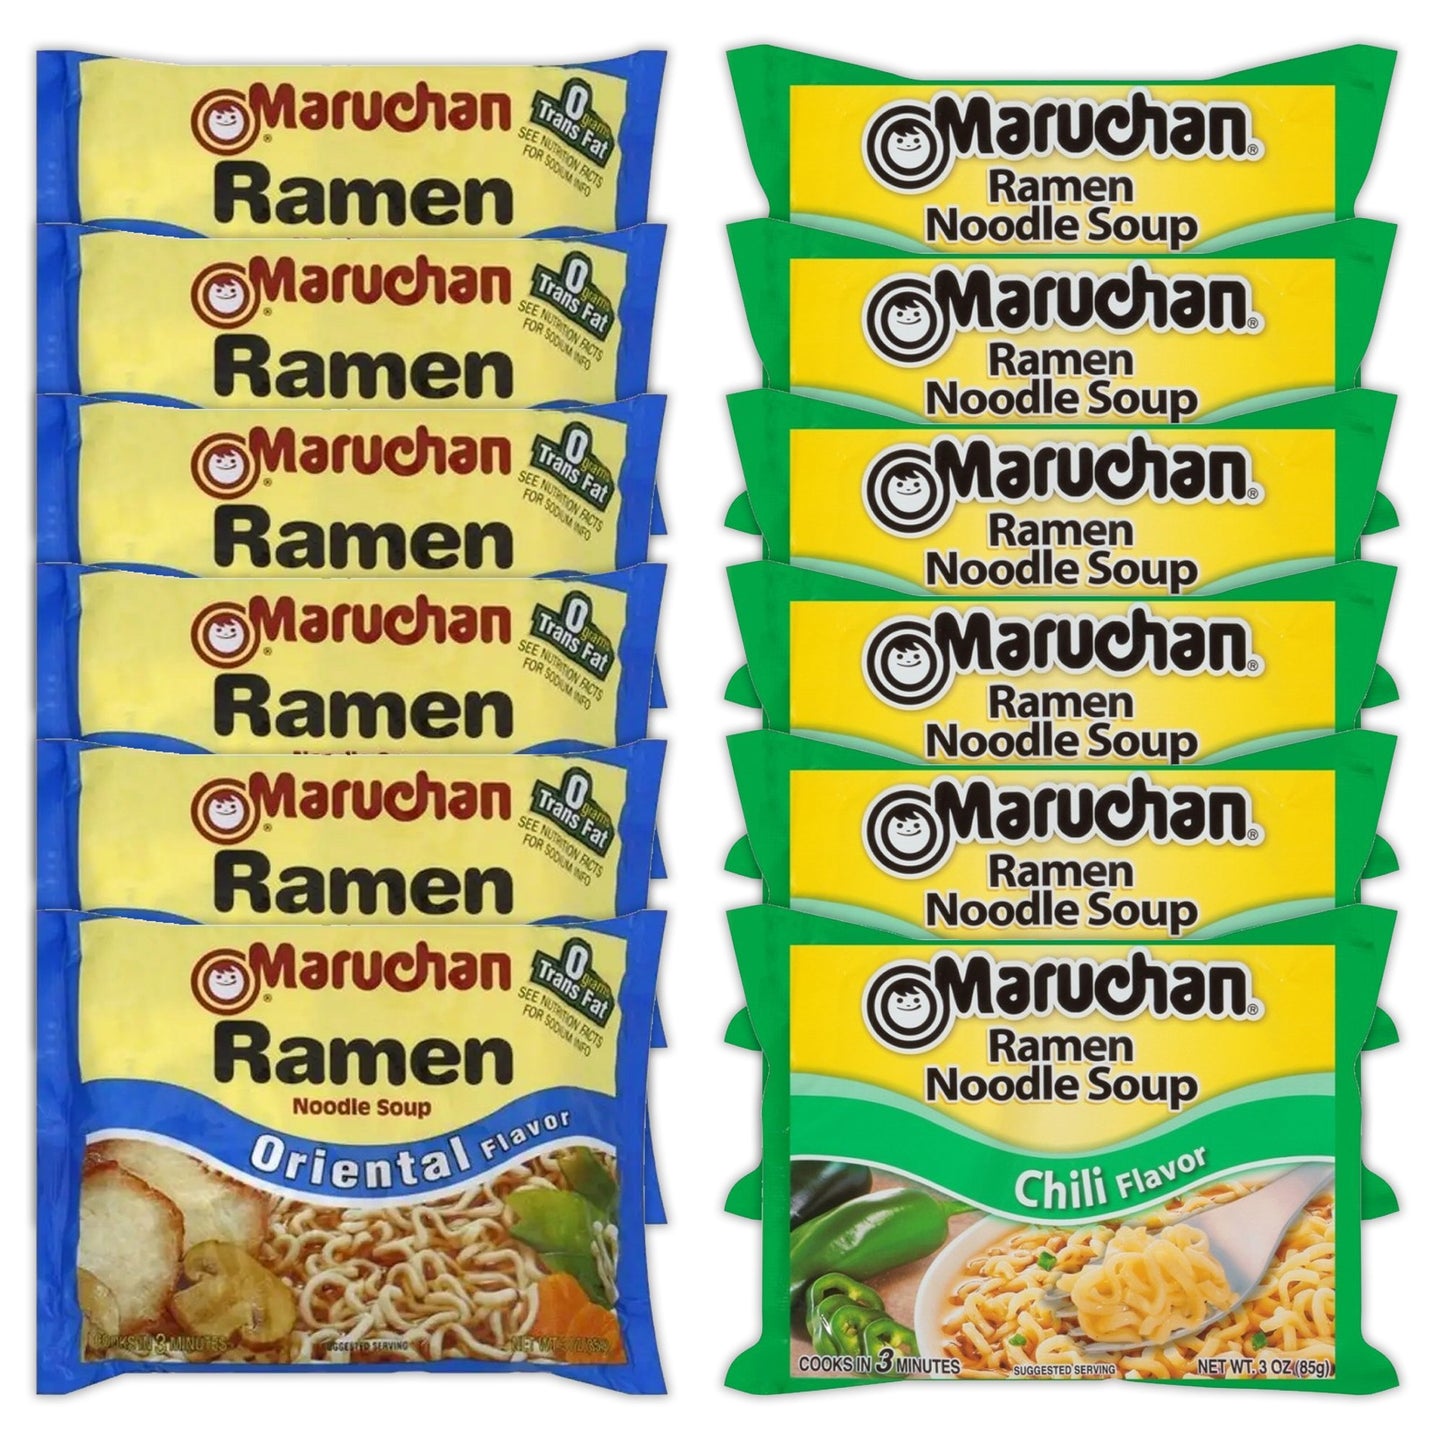 Maruchan Ramen Instant Noodle Soup Variety, 2 Flavors - 6 Packs Soy Sauce & 6 Packs Chili , 3 Ounce Single Servings Lunch / Dinner Variety